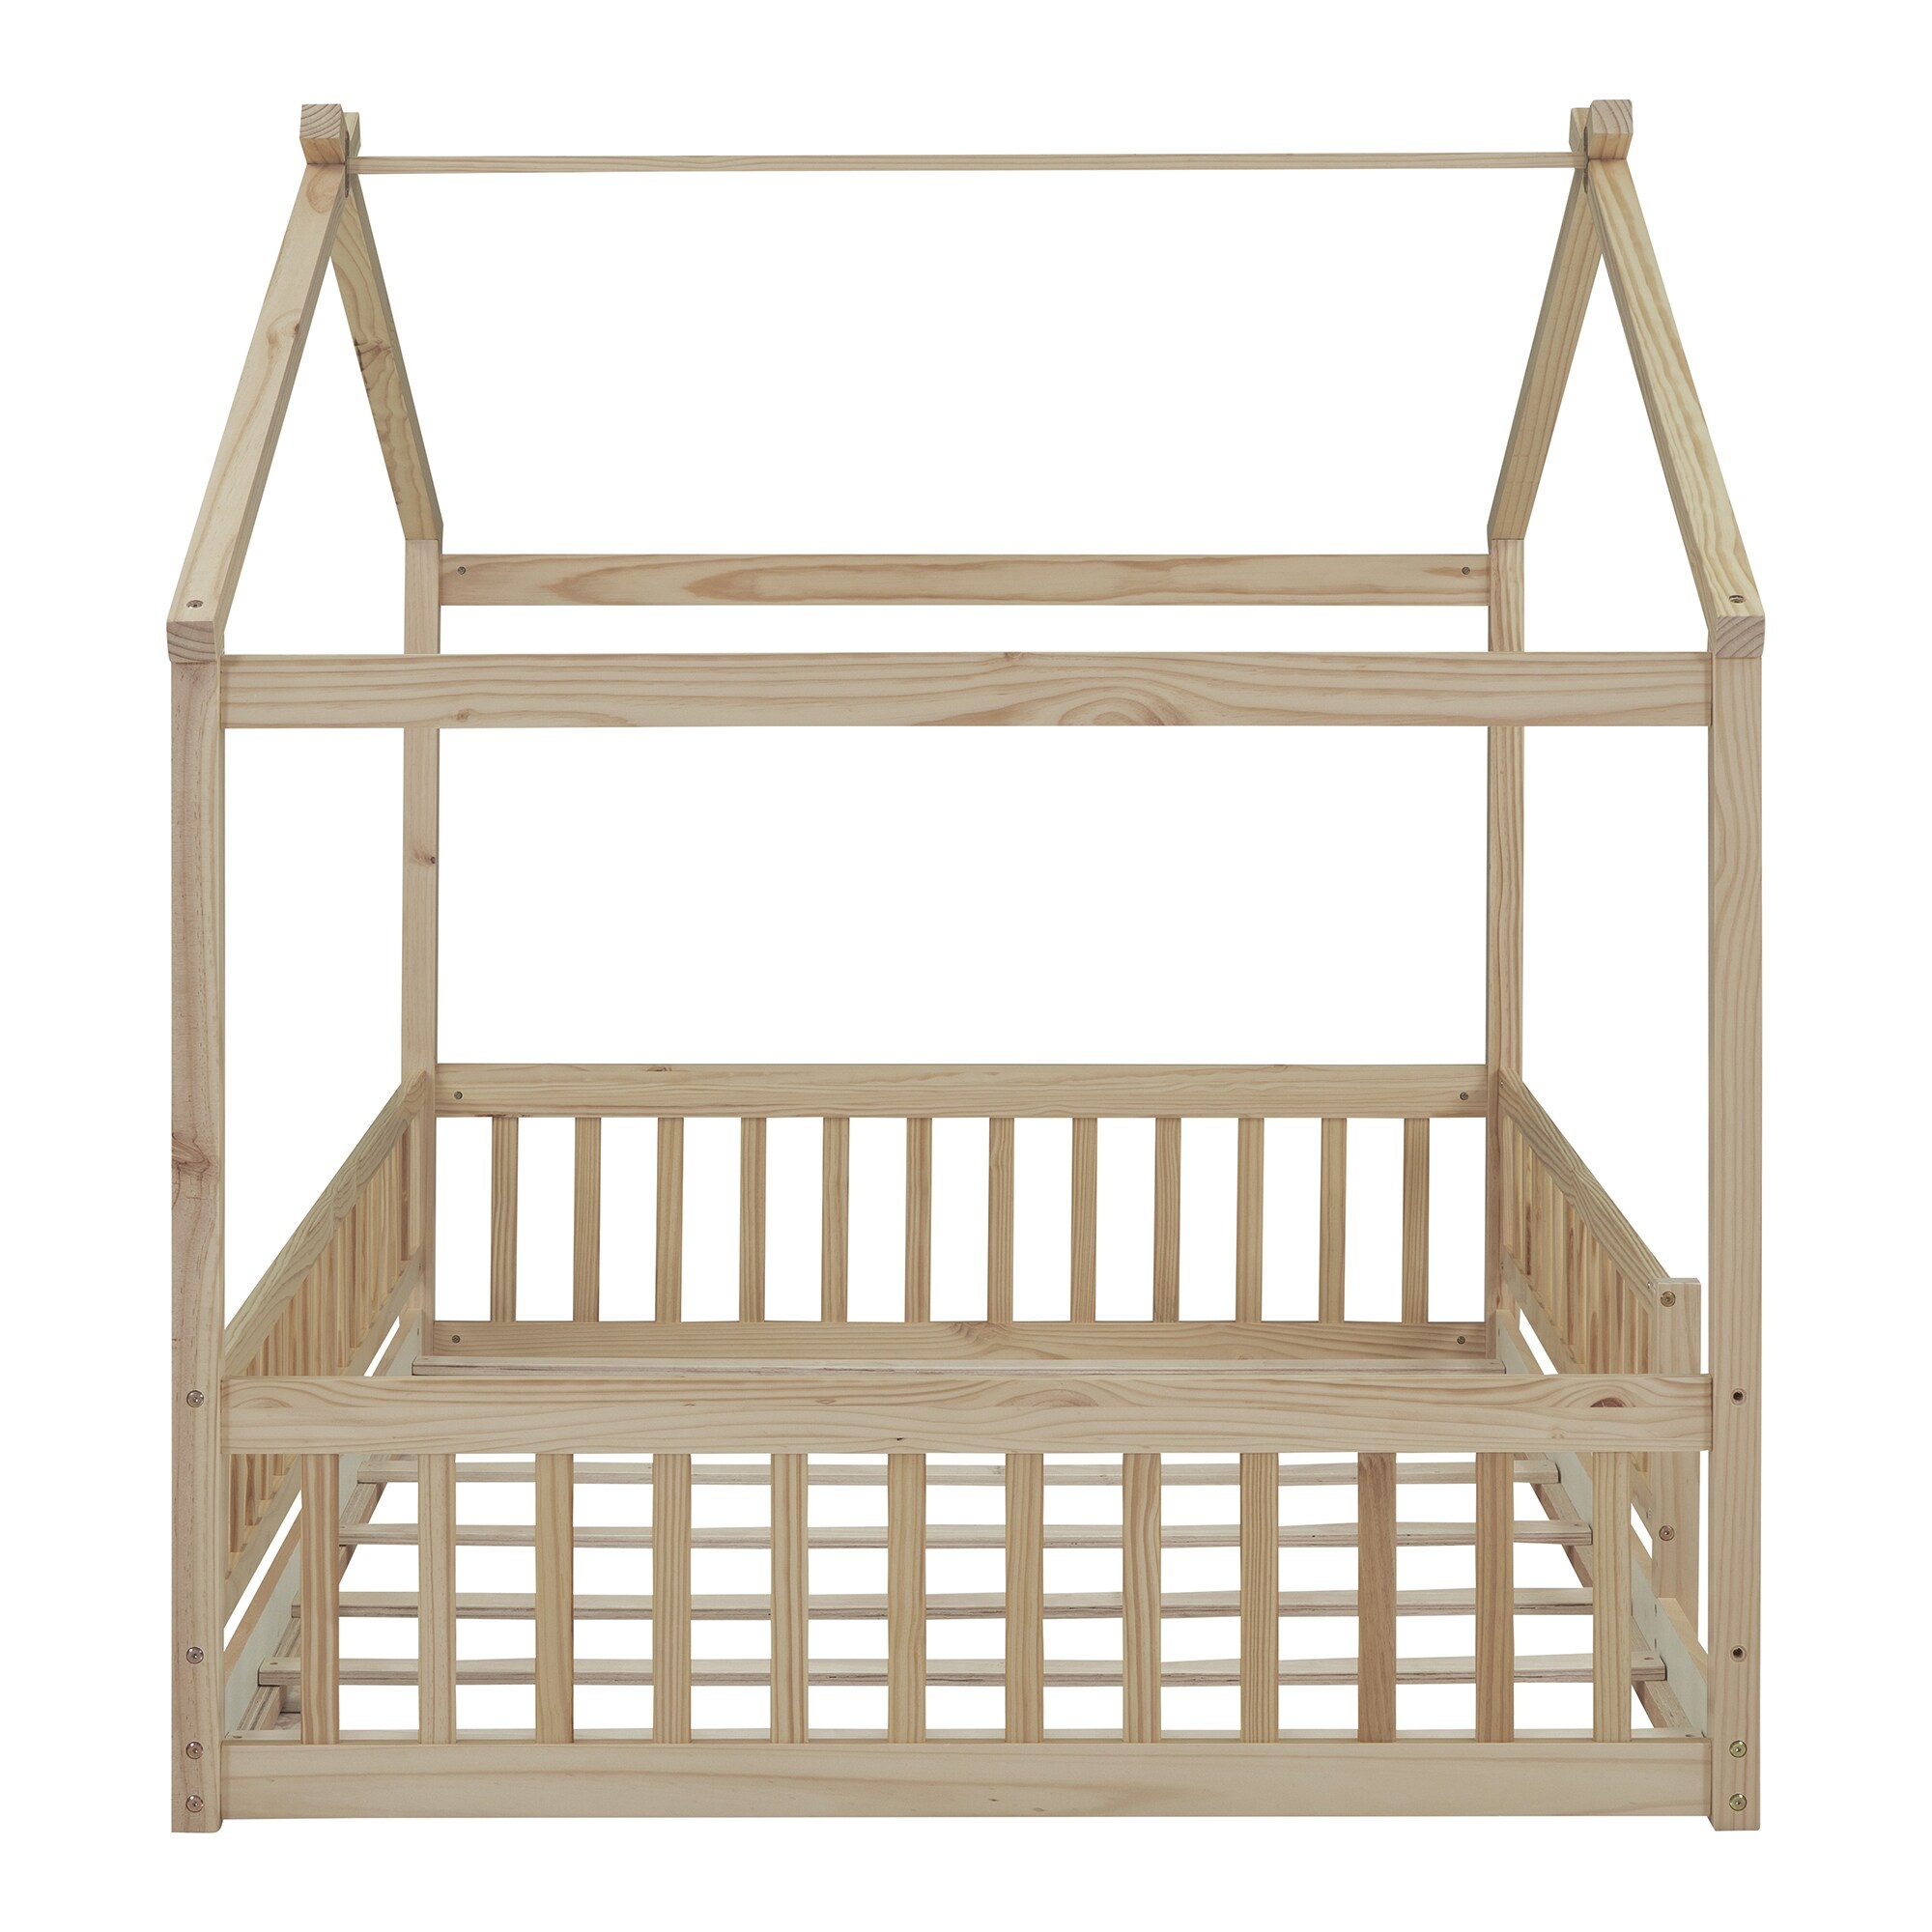 Wooden House Bed with Fence, for Kids, Teens, Girls, Boys